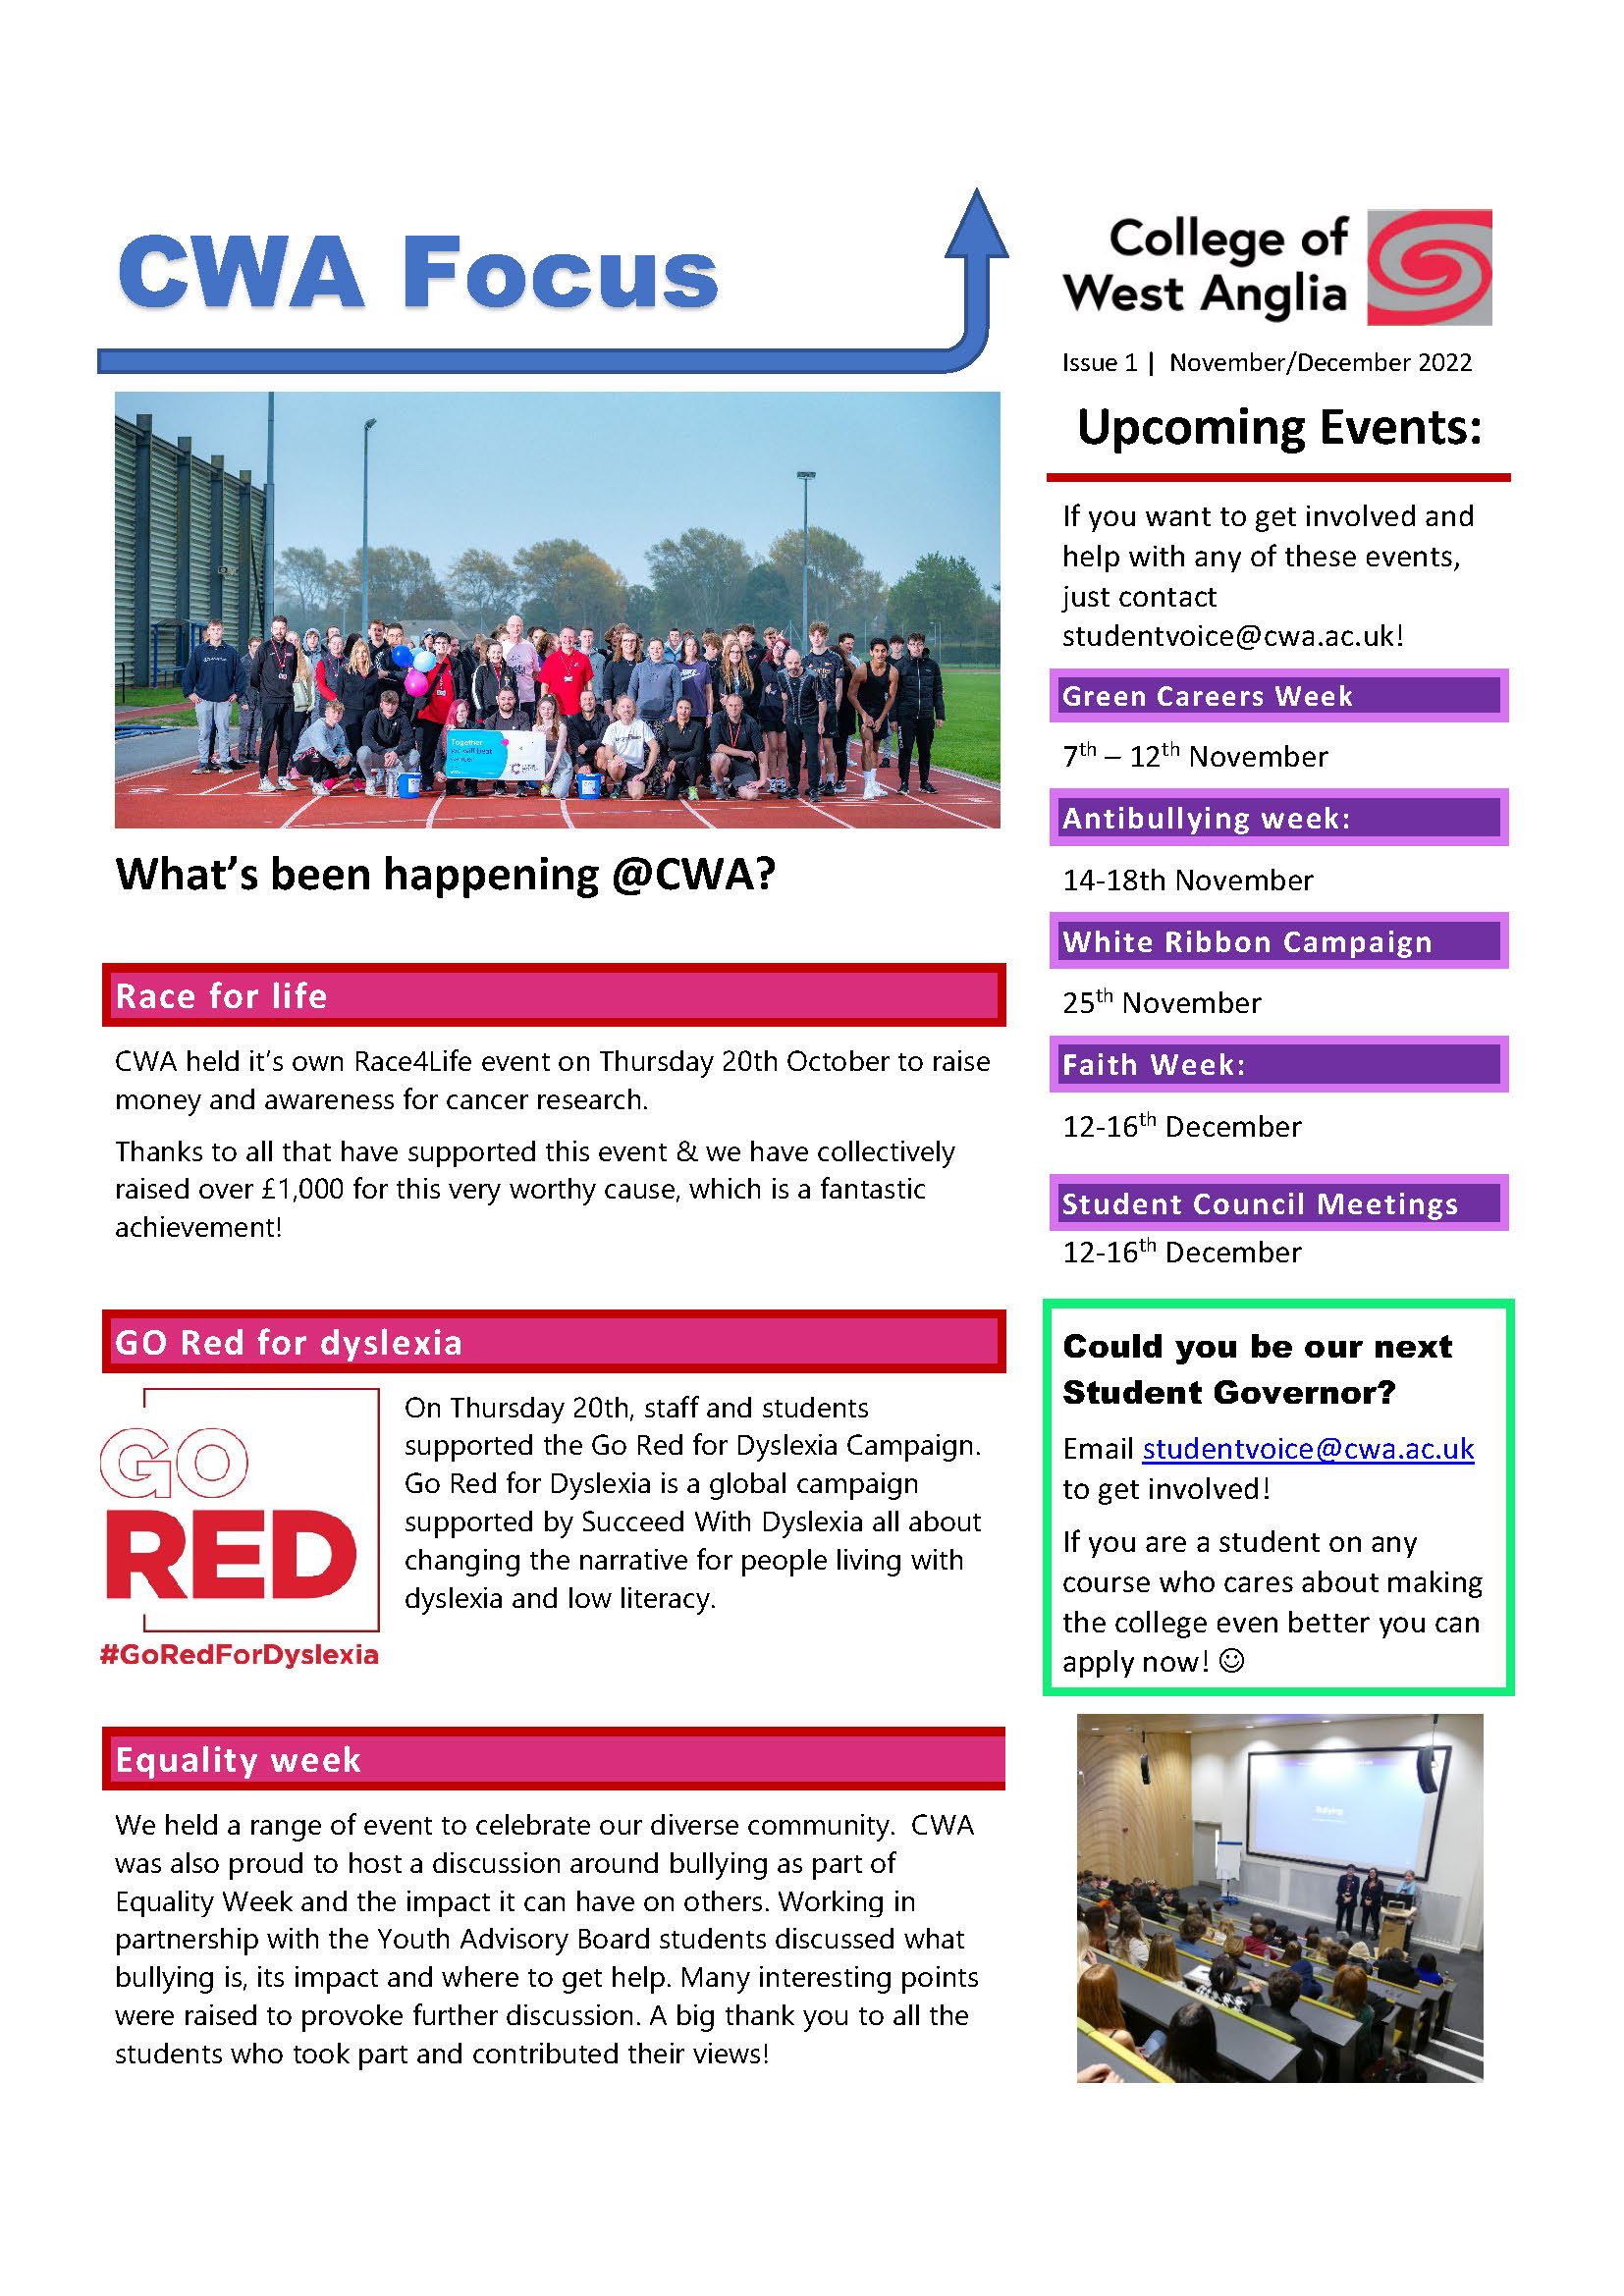 CWA Focus Issue 1 Page 1